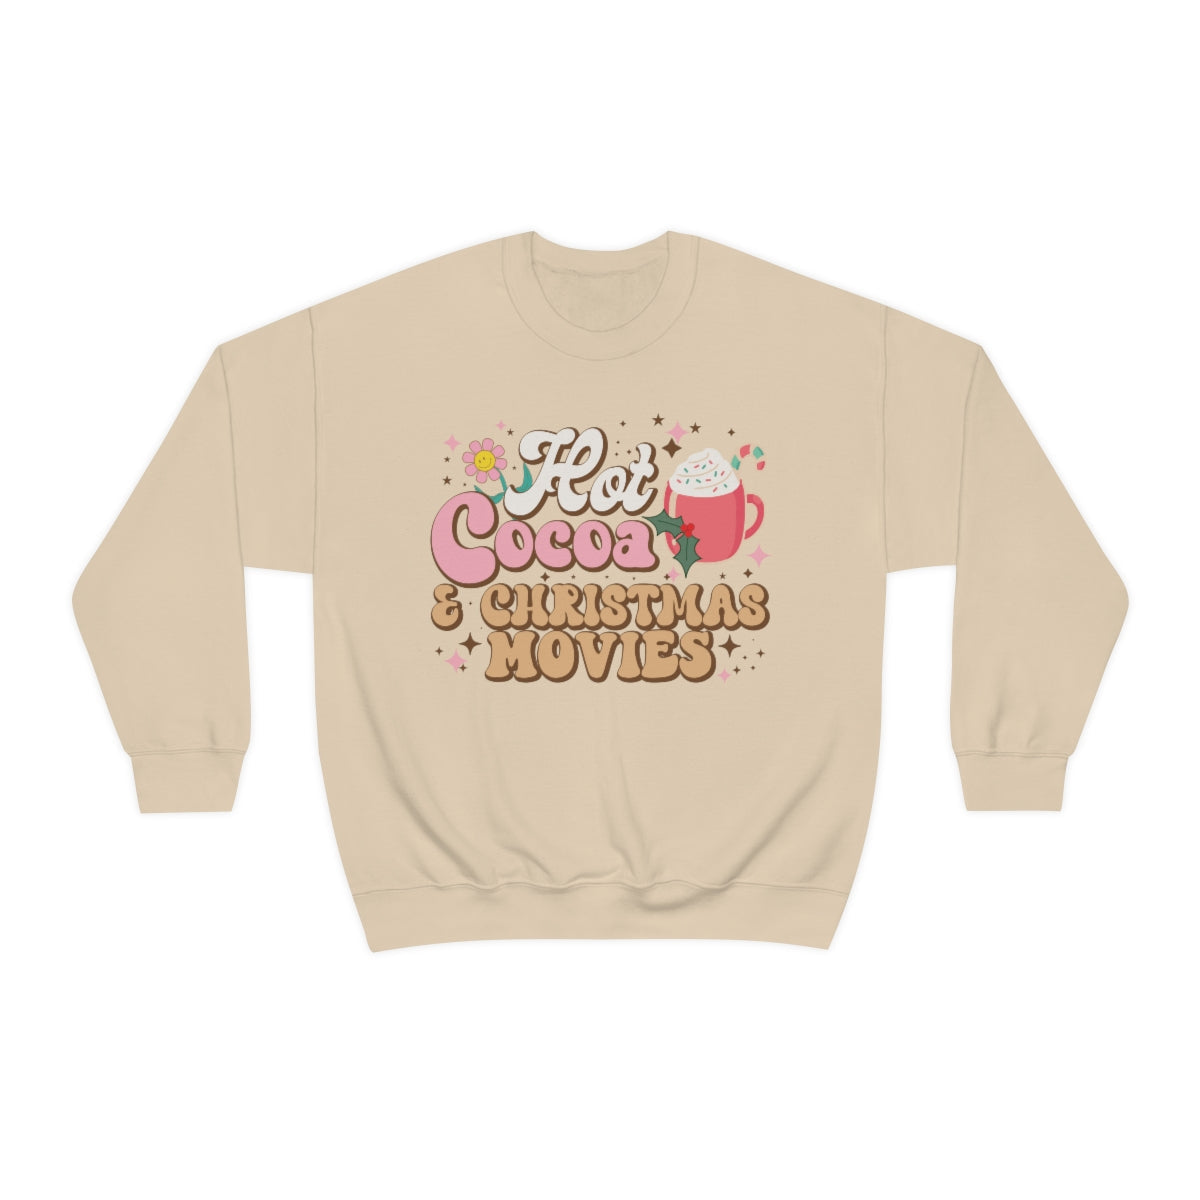 Hot Cocoa and Christmas Movies Retro Christmas Sweatshirt for Women in Ash Grey